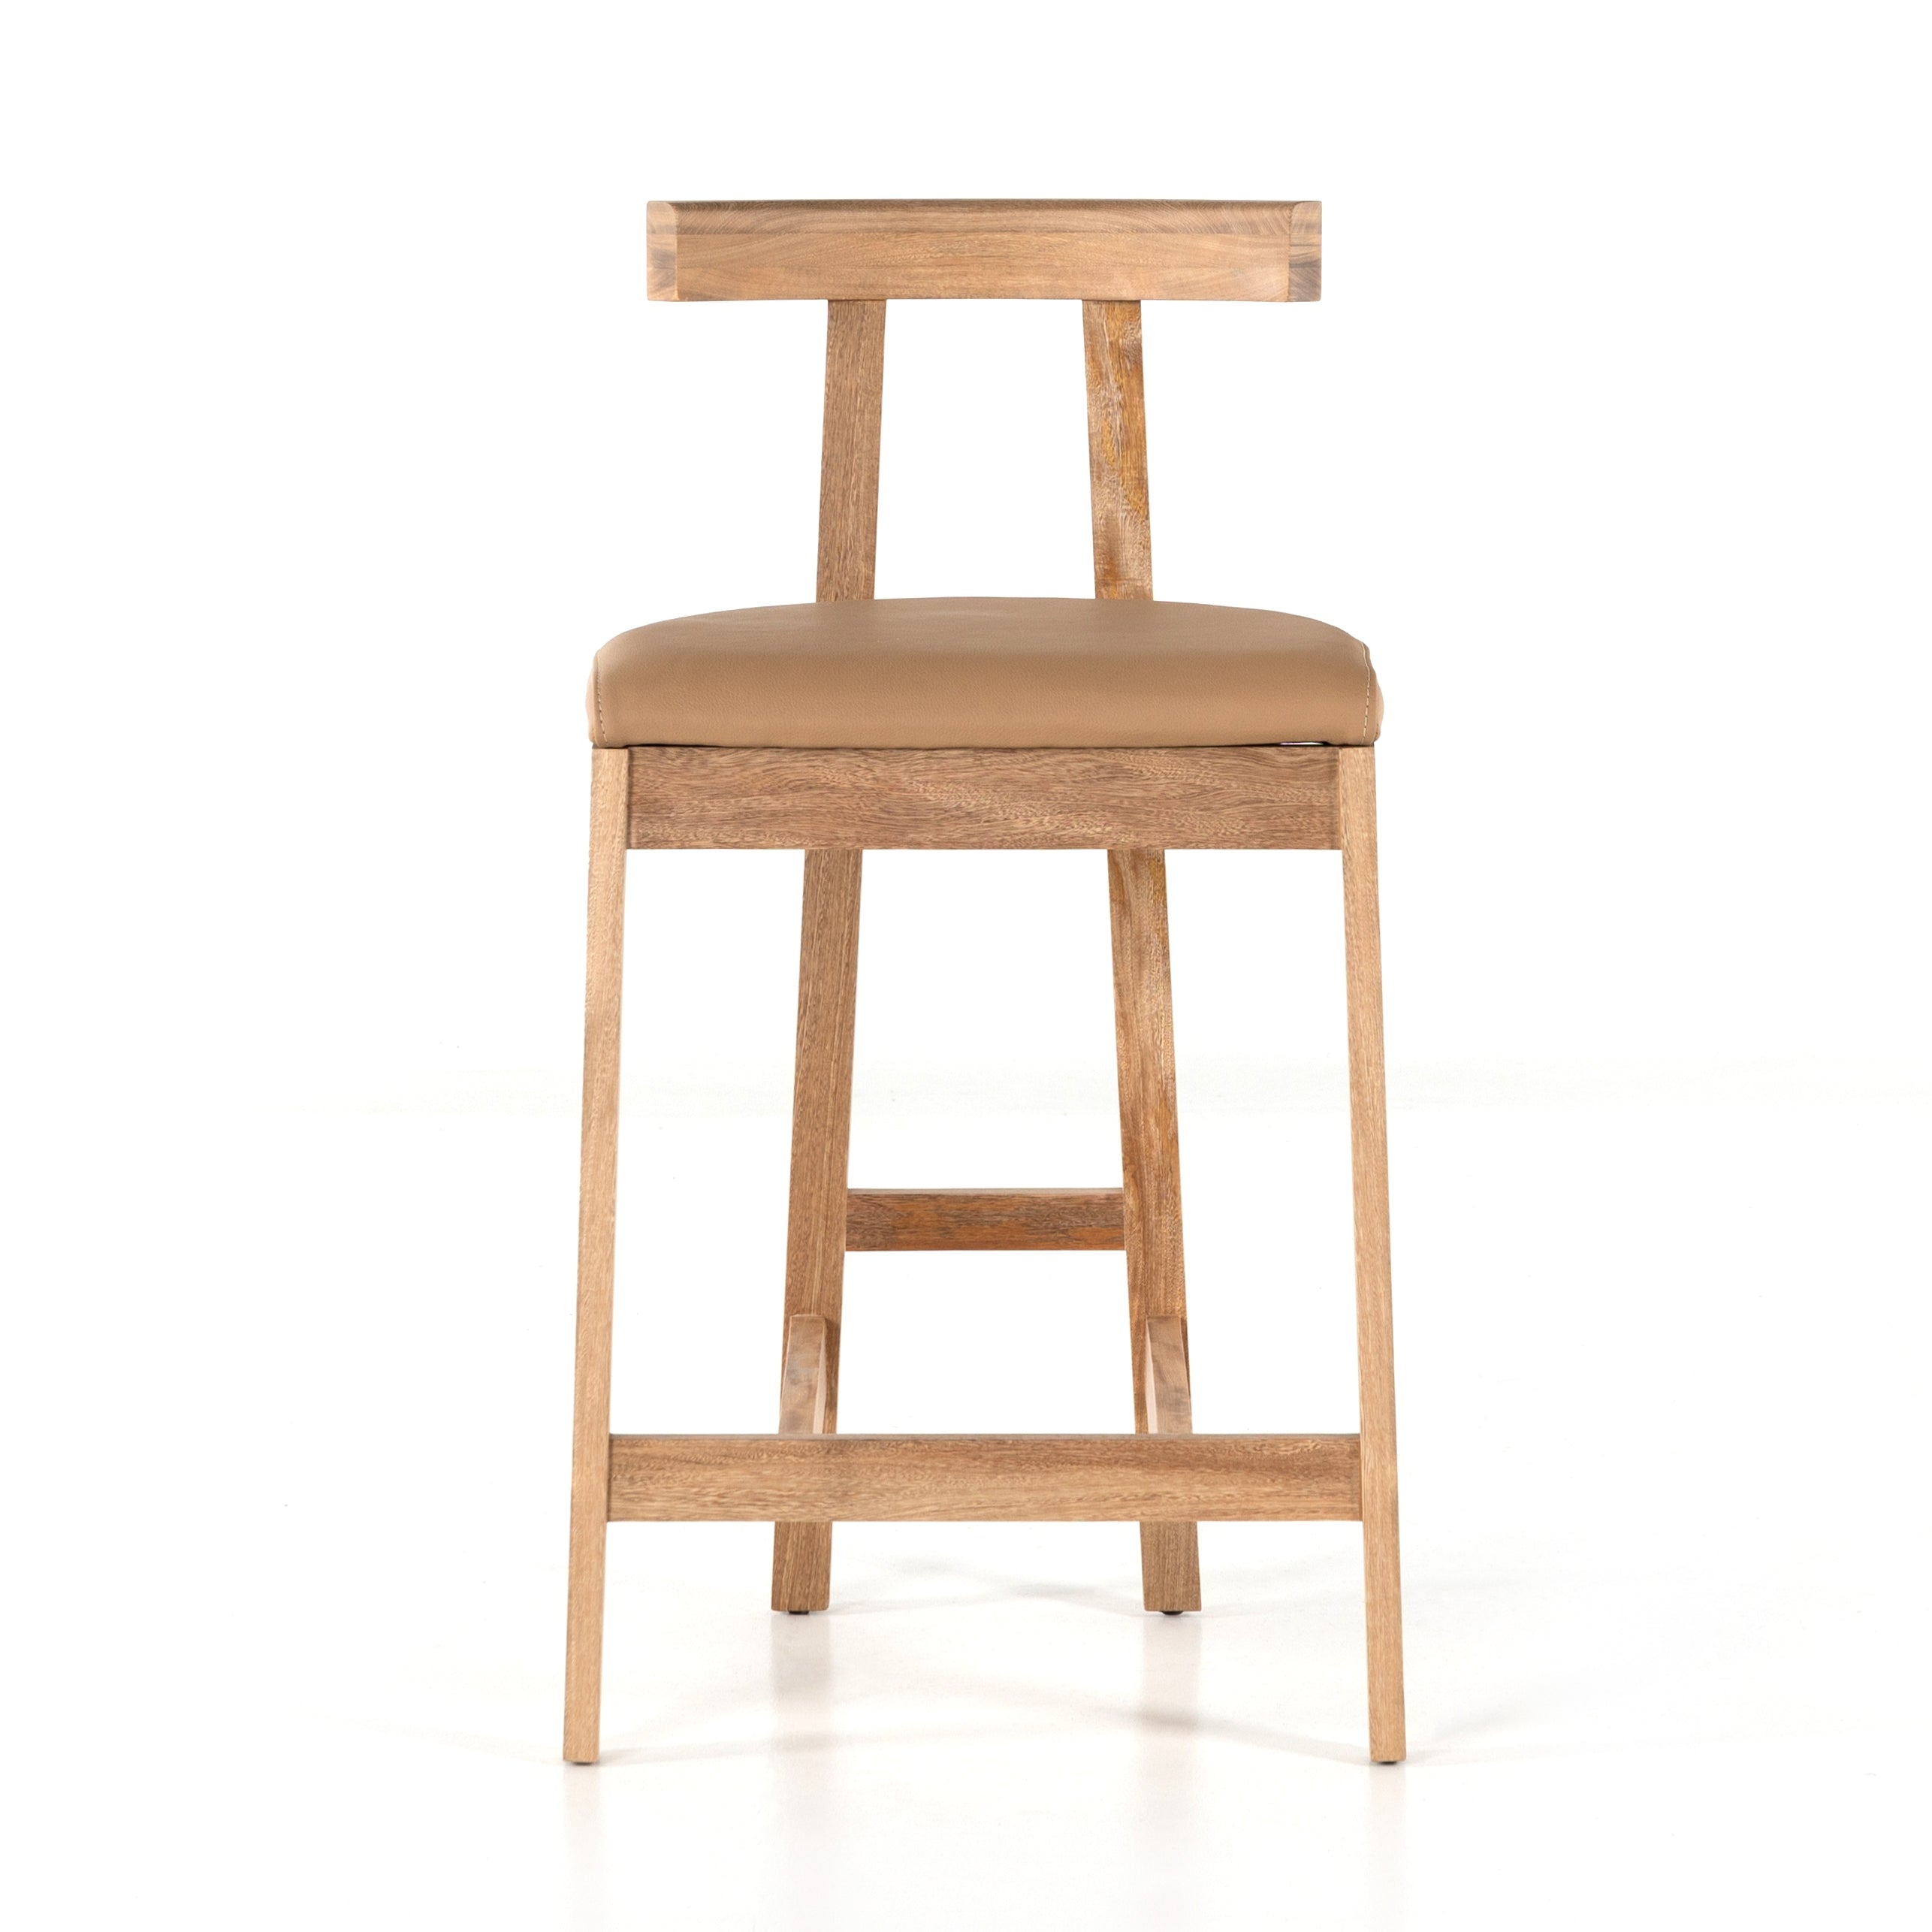 Solid Rosa Morada forms a T-shape frame on this Tex Bar + Counter Stool. The light tan top-grain leather seating is so comfy -- a perfectly sized stool for your kitchen island or bar area. 